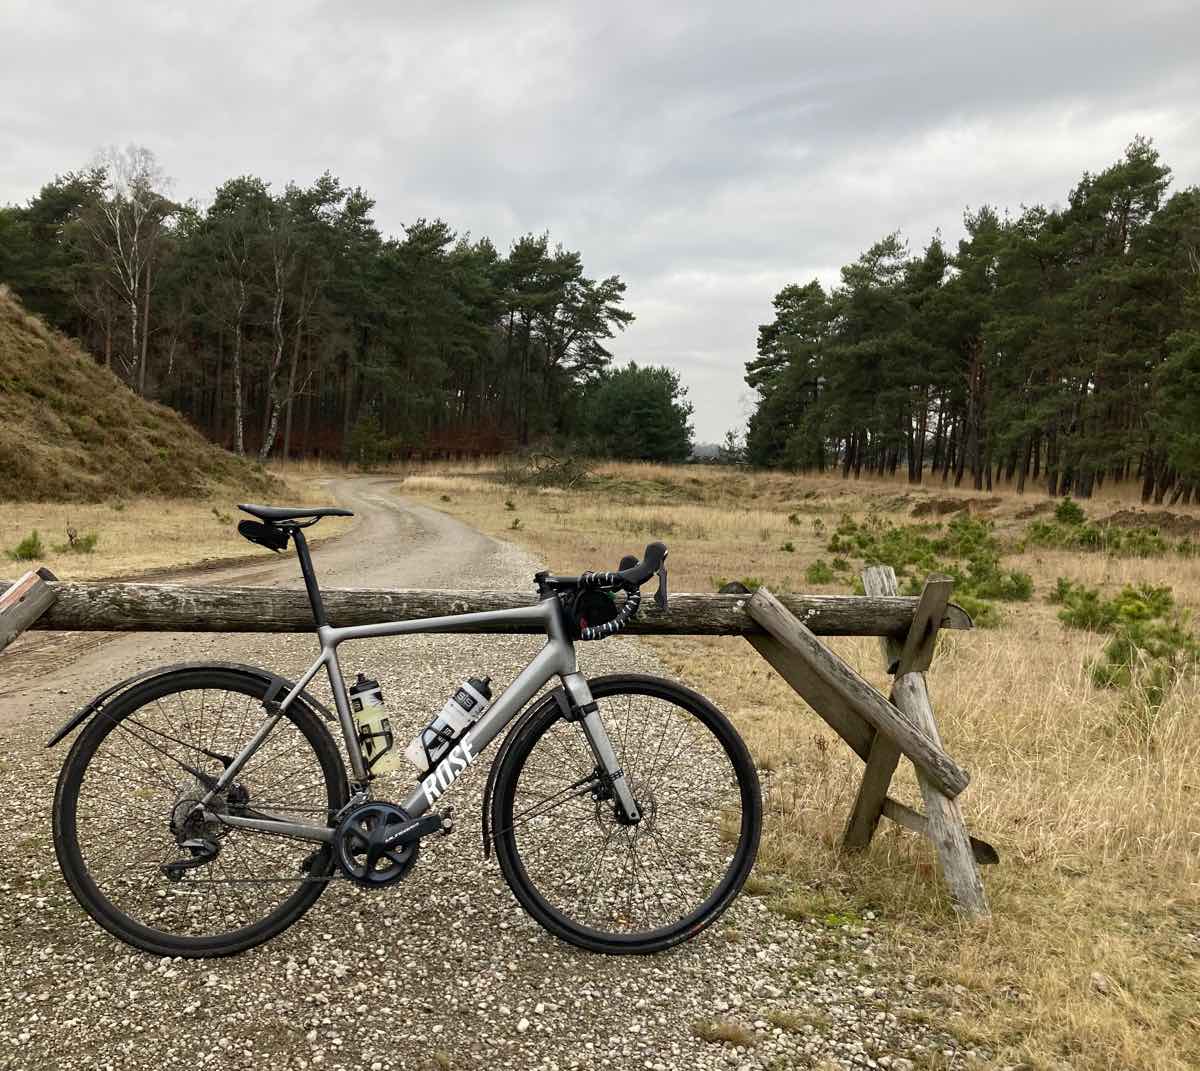 bikerumor pic of the day a gravel bike named rose is leaning against a wood barrier across a gravel road leading around a hill towards some pine trees, the sky is covered in clouds and the day is bright but grey.